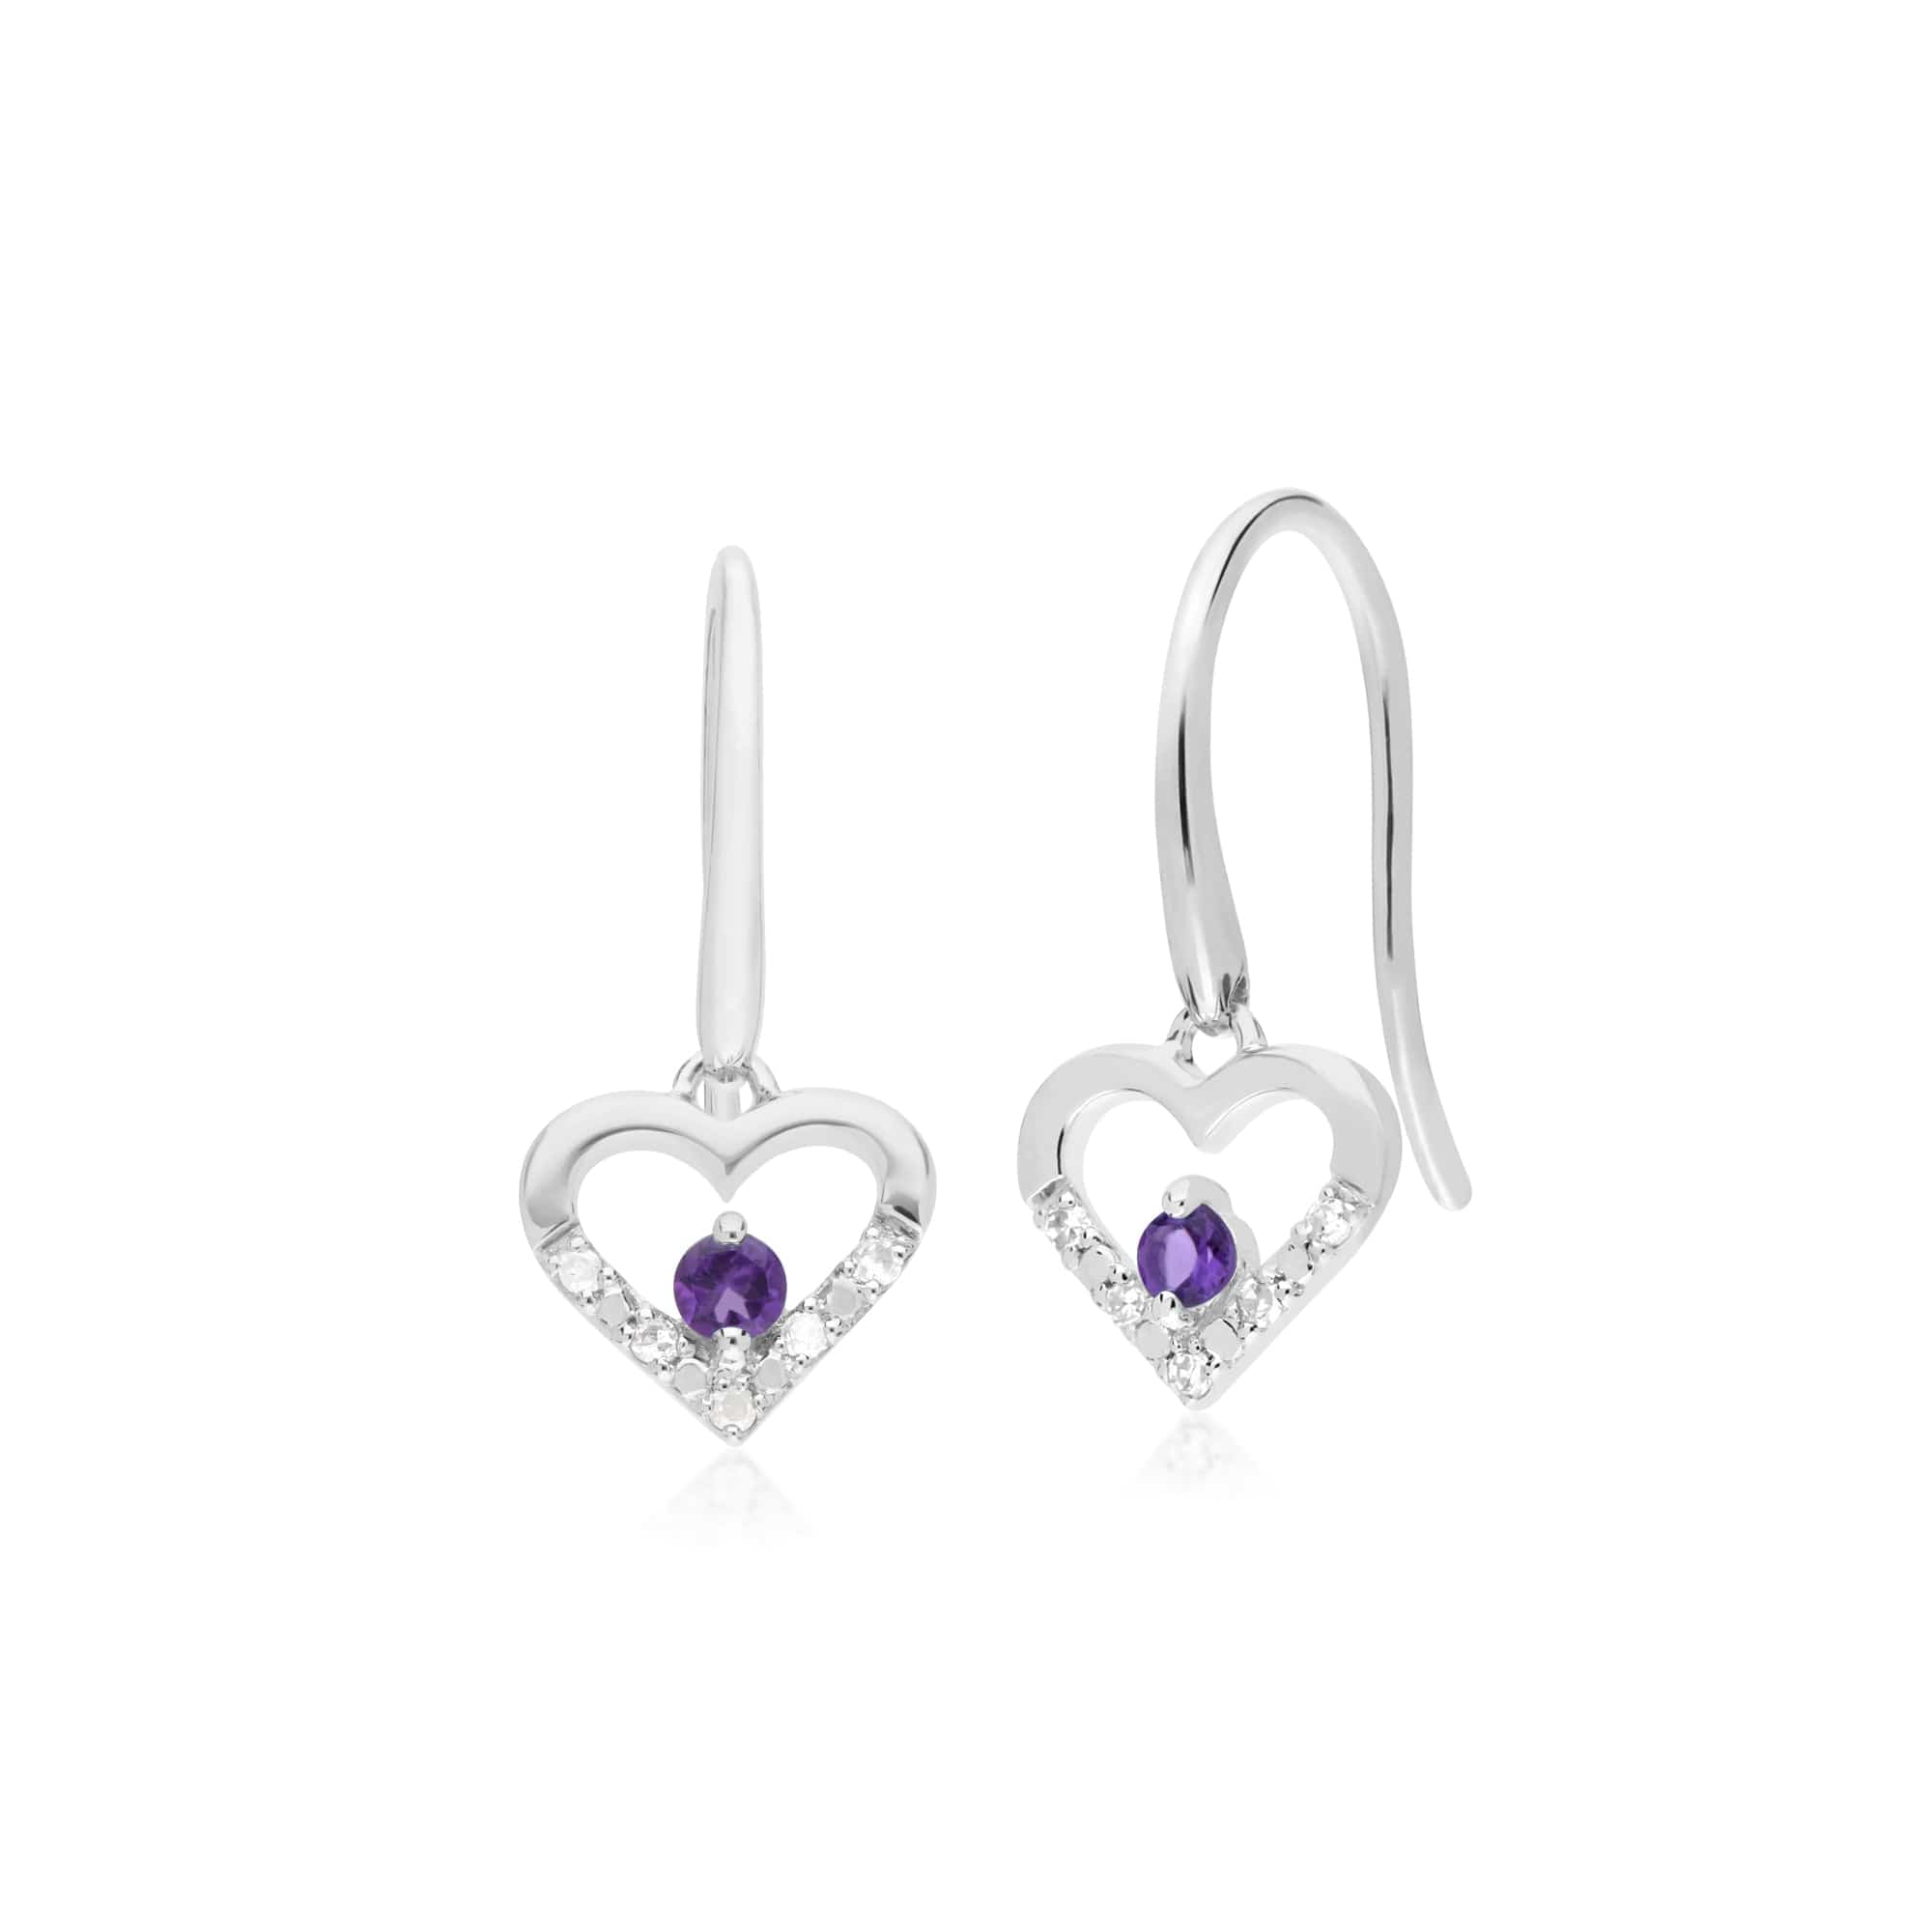 162E0258049 Classic Round Amethyst & Diamond Love Heart Shaped Drop Earrings in 9ct White Gold 1